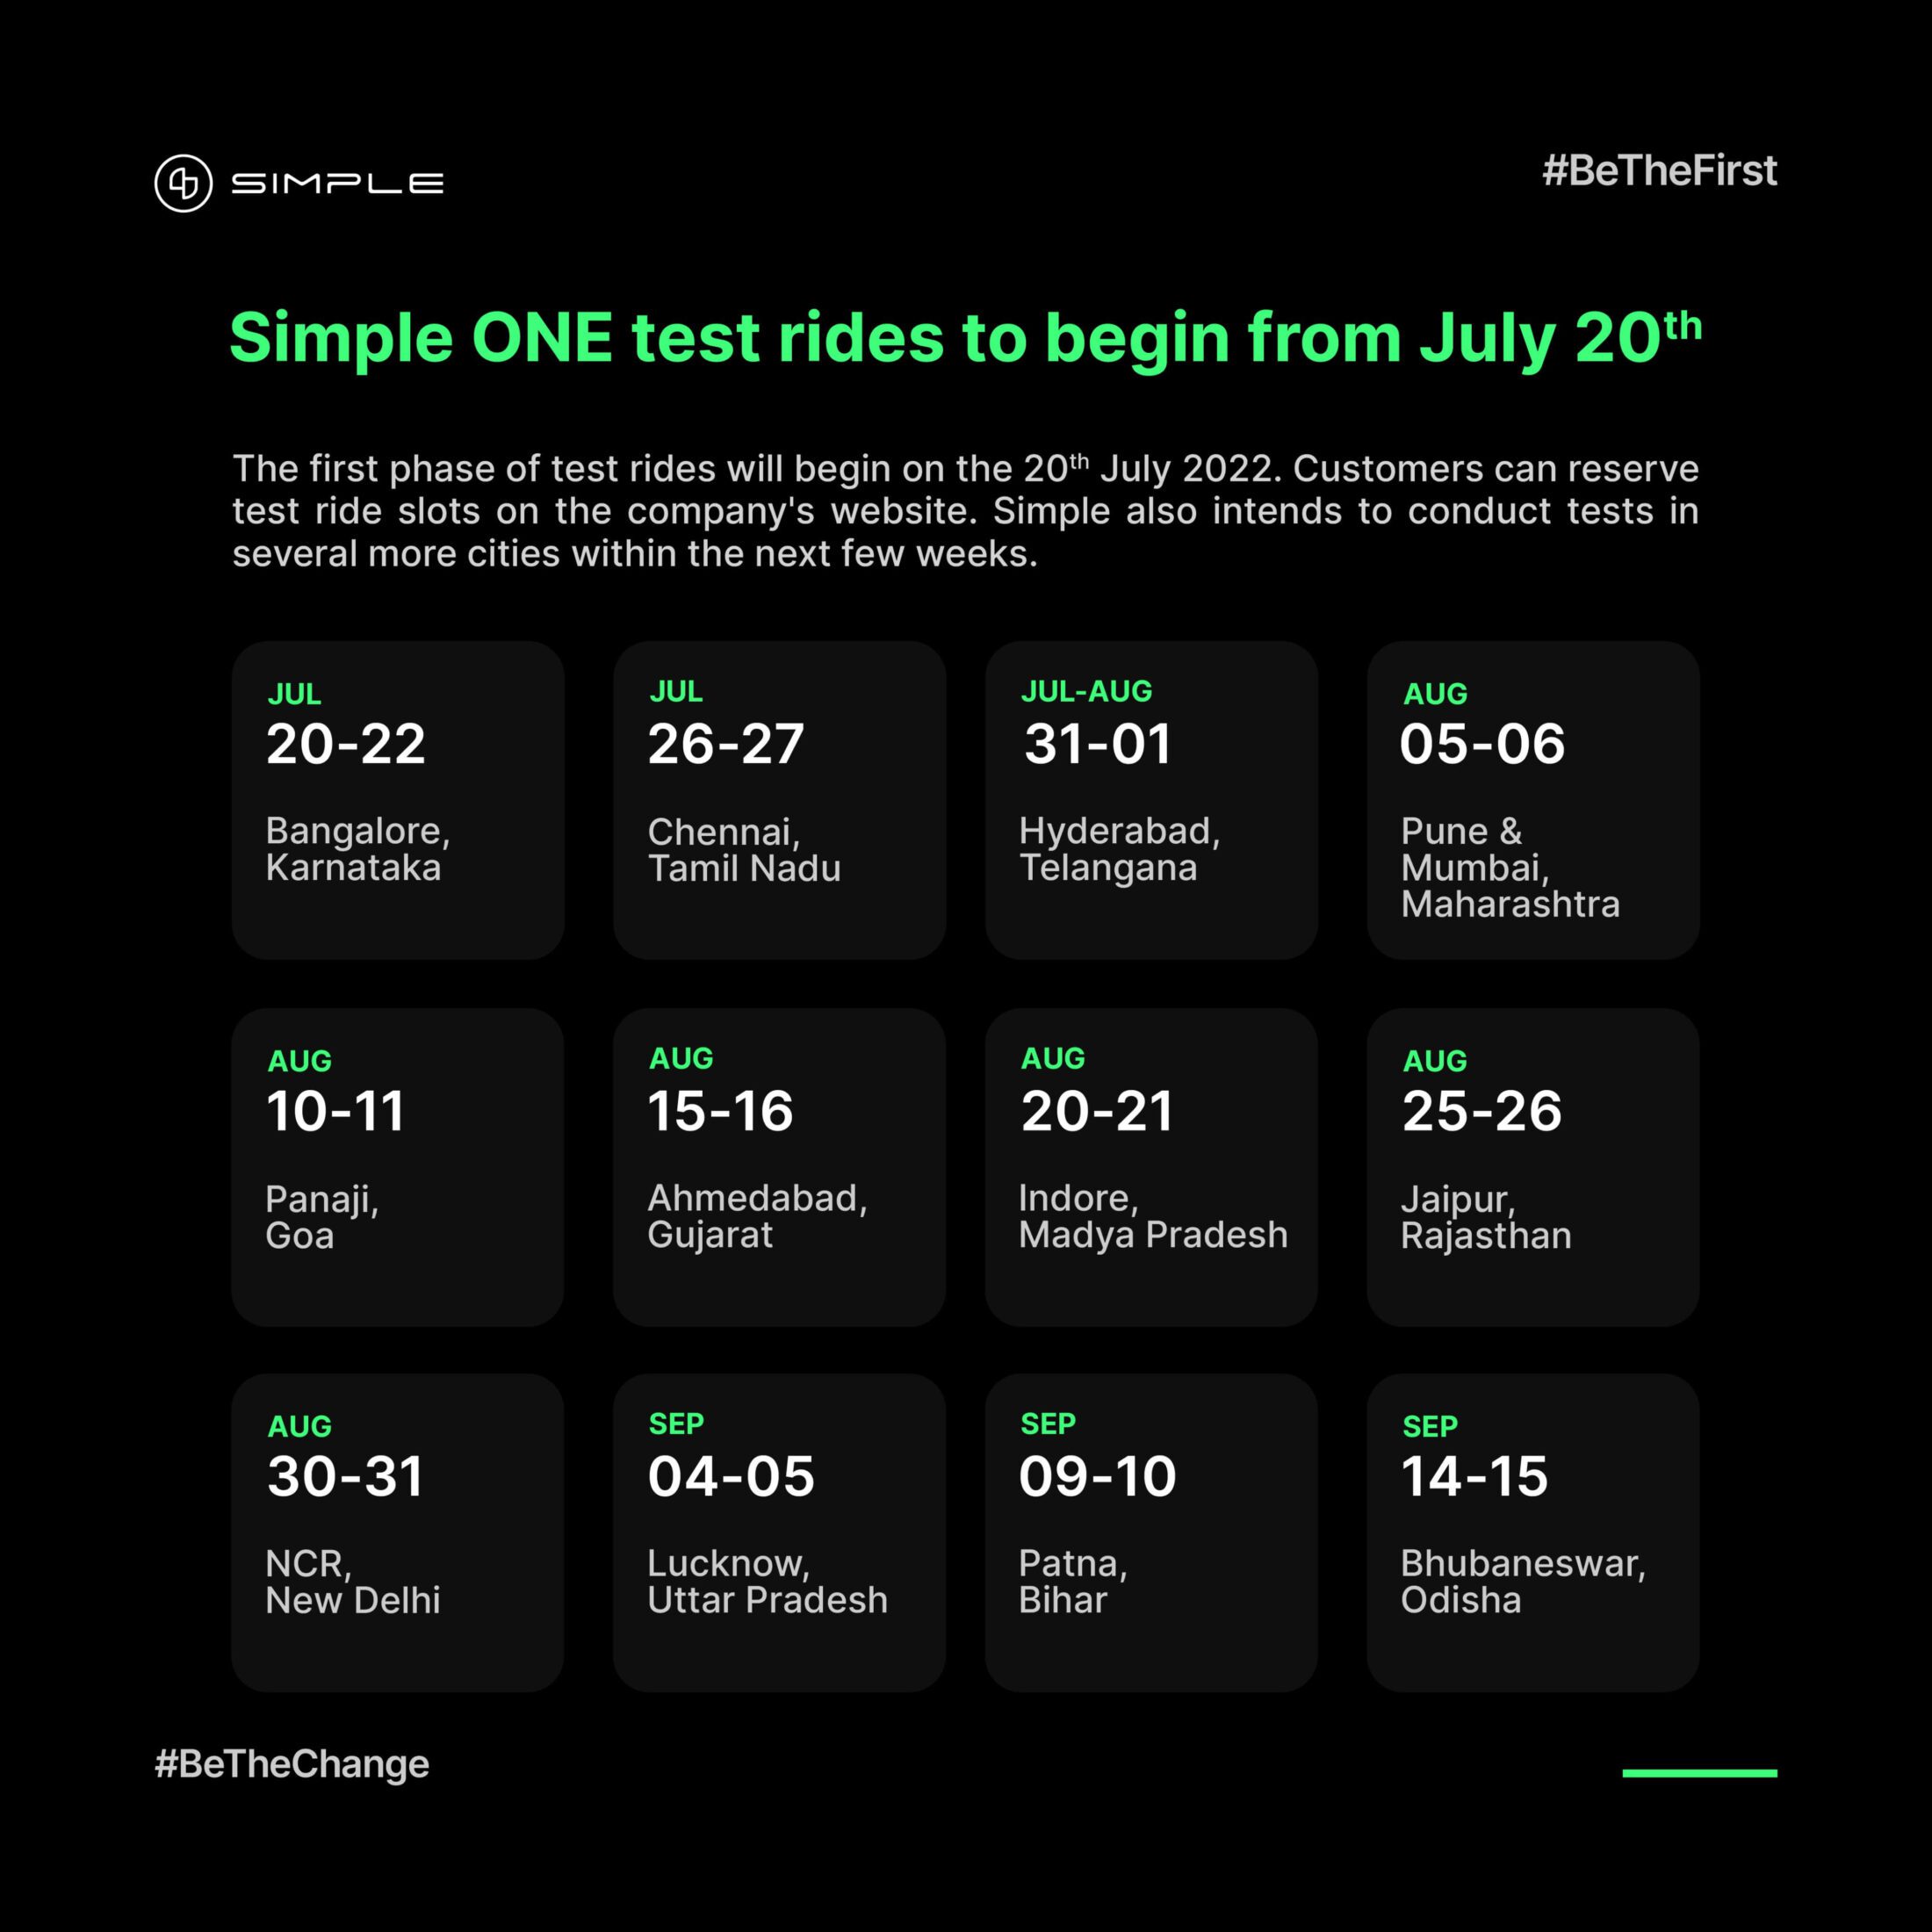 https://e-vehicleinfo.com/simple-one-test-ride-to-begin-from-july-20th-know-the-cities/